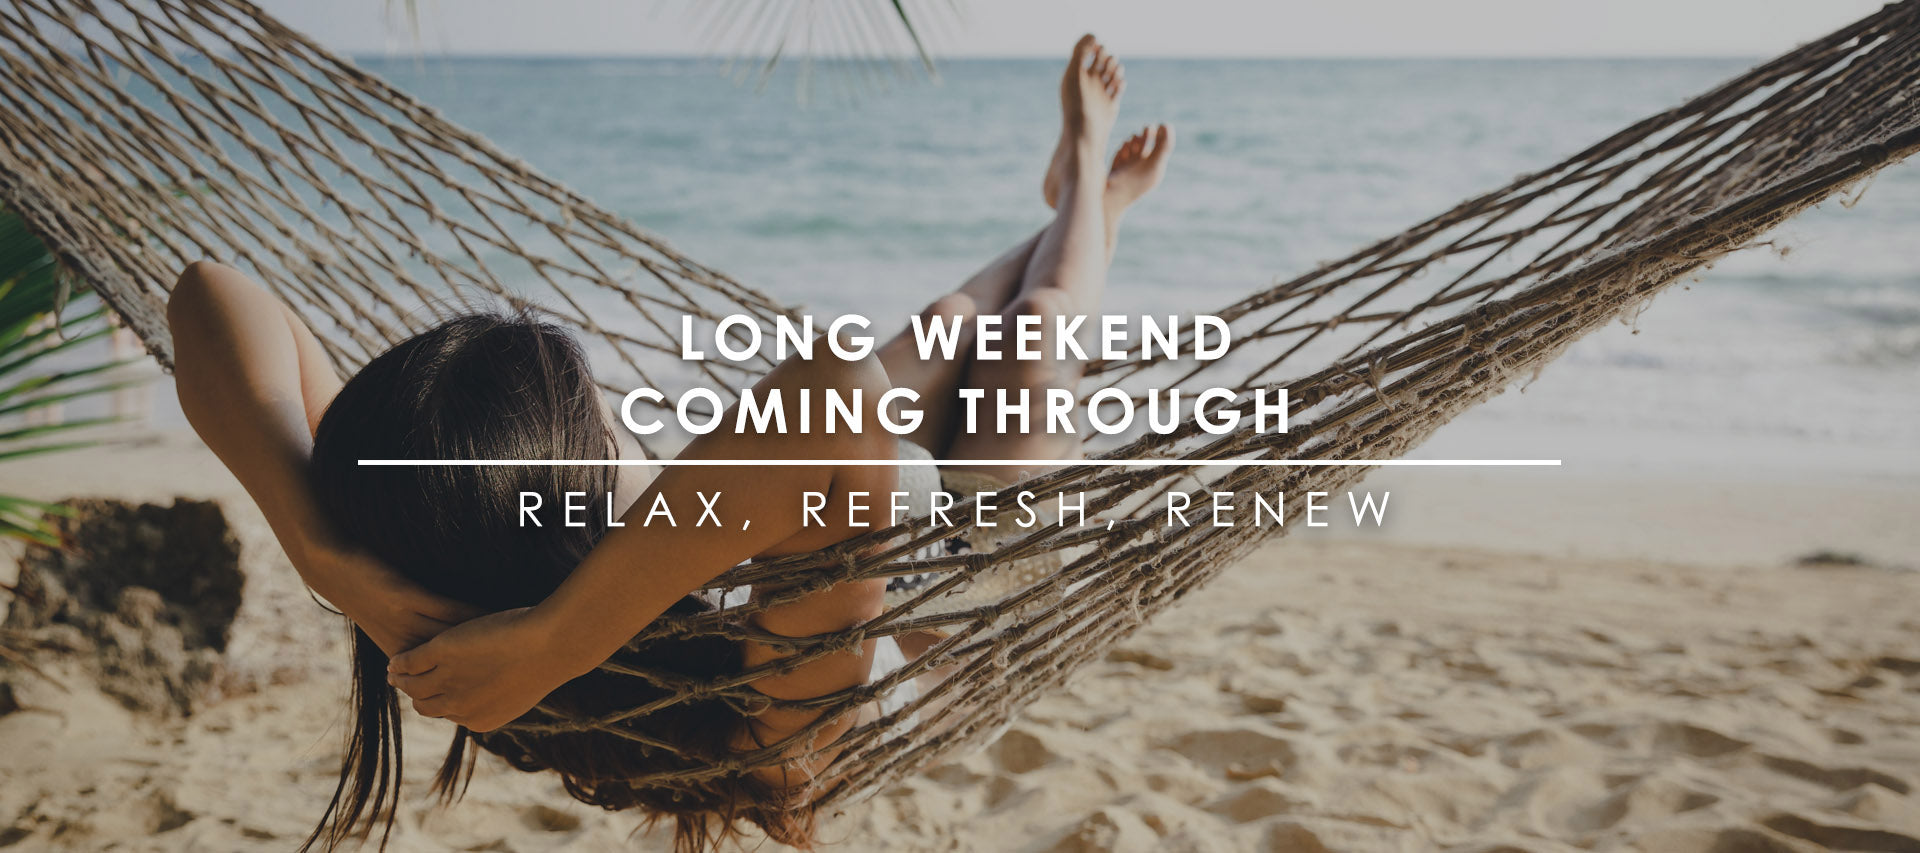 What to Do Over a Long Weekend